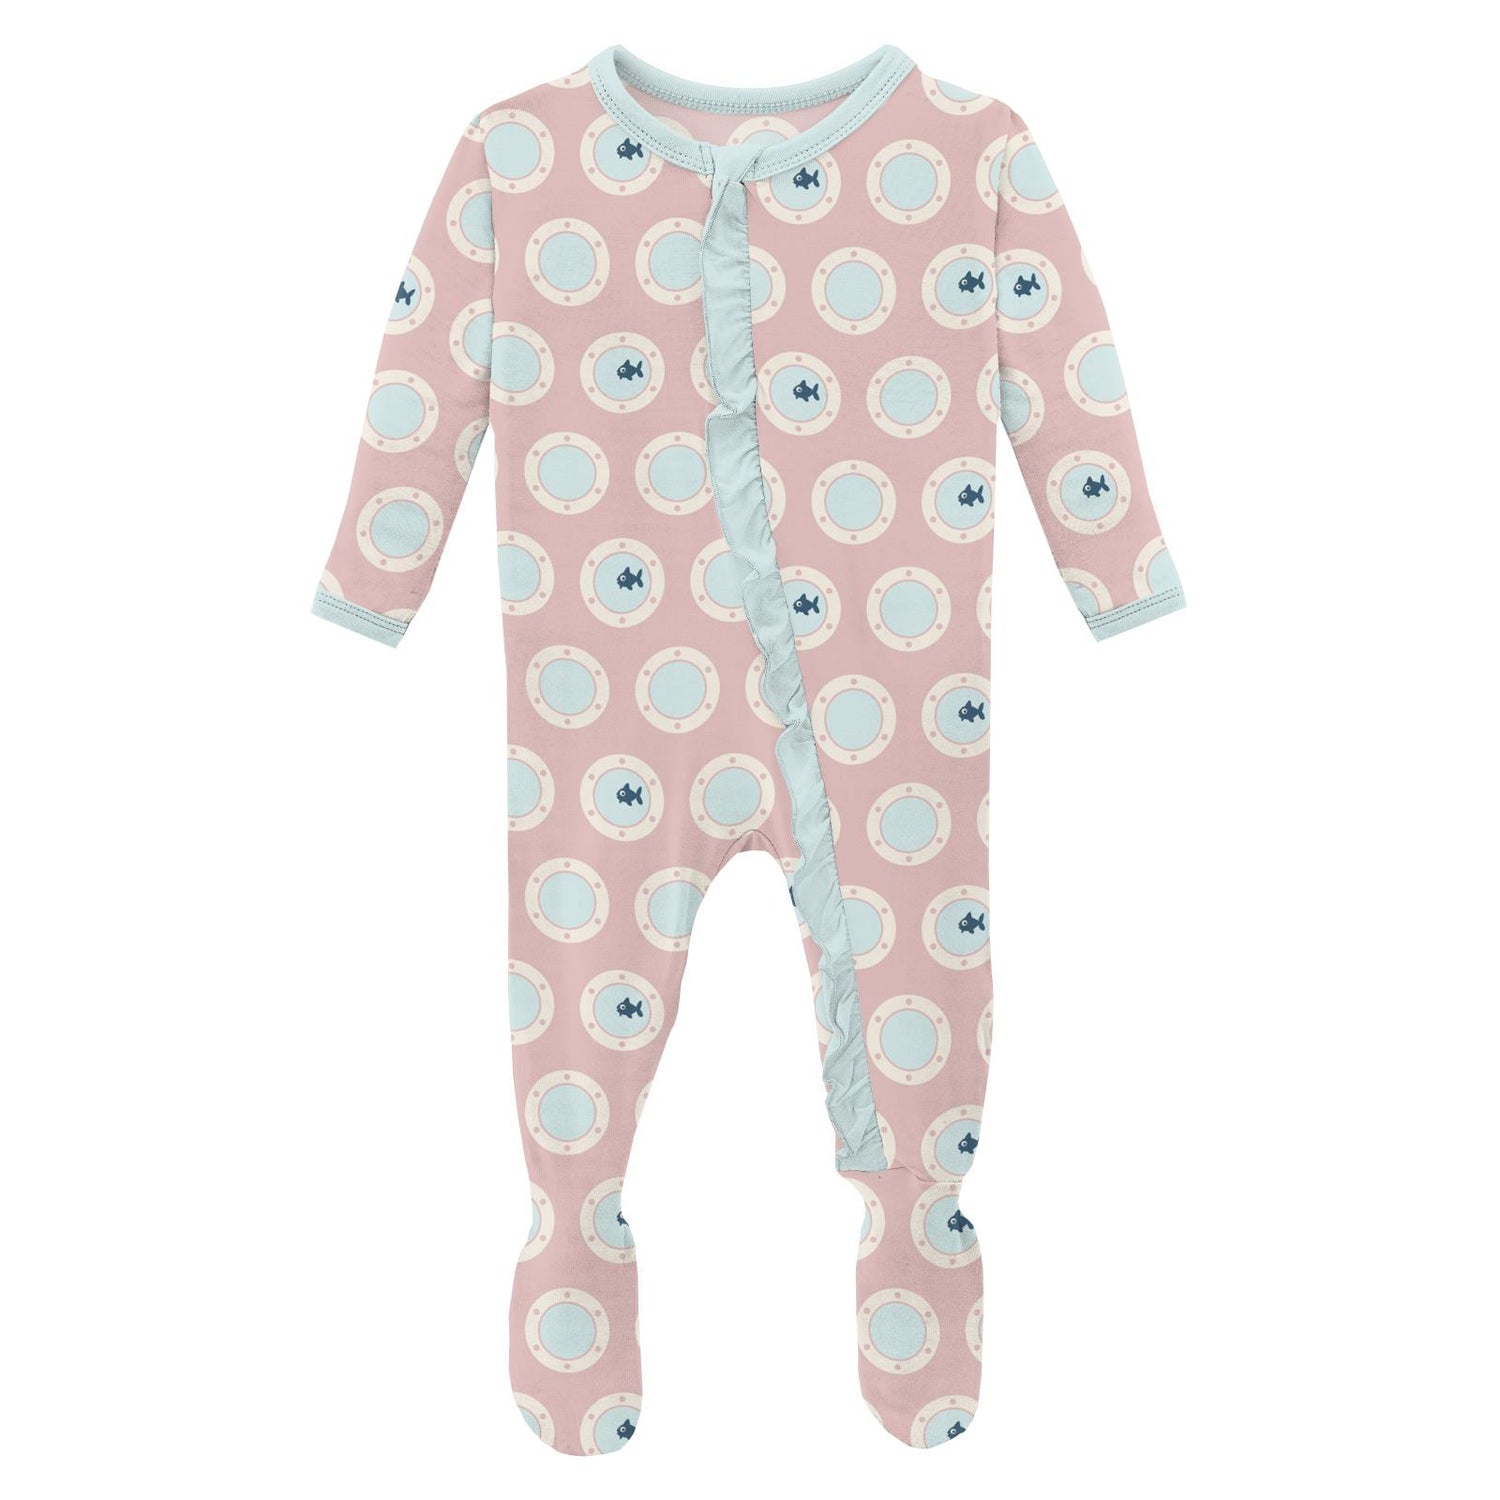 Print Classic Ruffle Footie with Zipper in Baby Rose Porthole